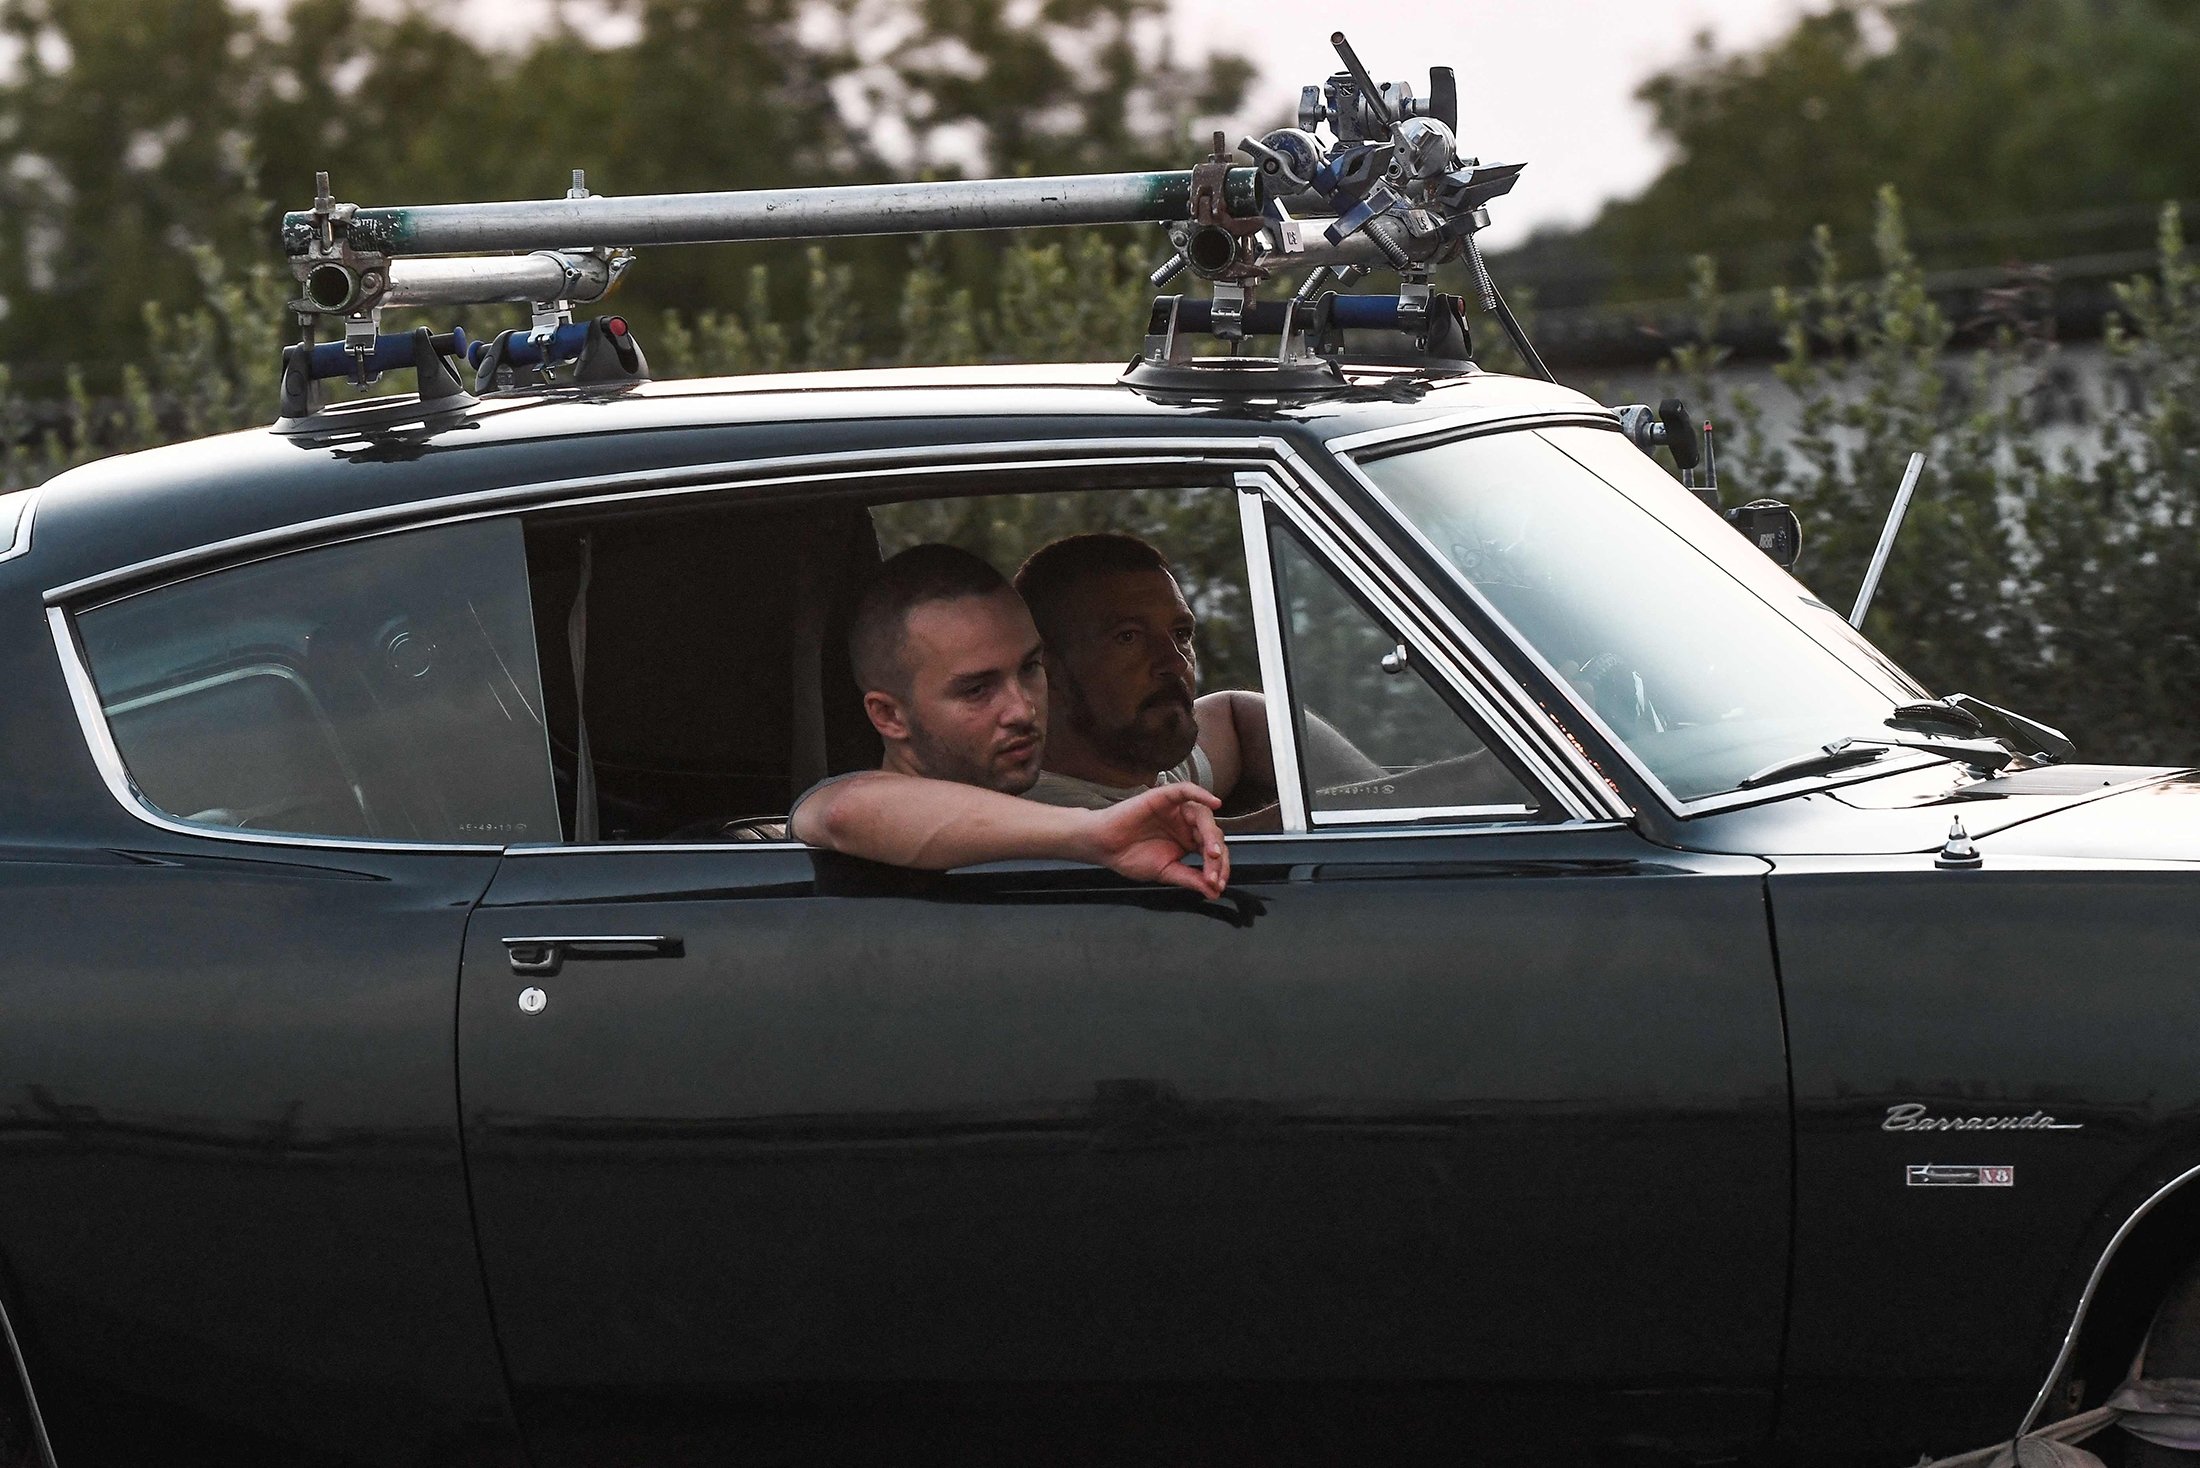 Spanish actor, film director and producer Antonio Banderas (back) driving a car, with a crew member during the filming of the action thriller, 'The Enforcer,' in the ring road of Thessaloniki, Greece, June 30, 2021. (AFP Photo)